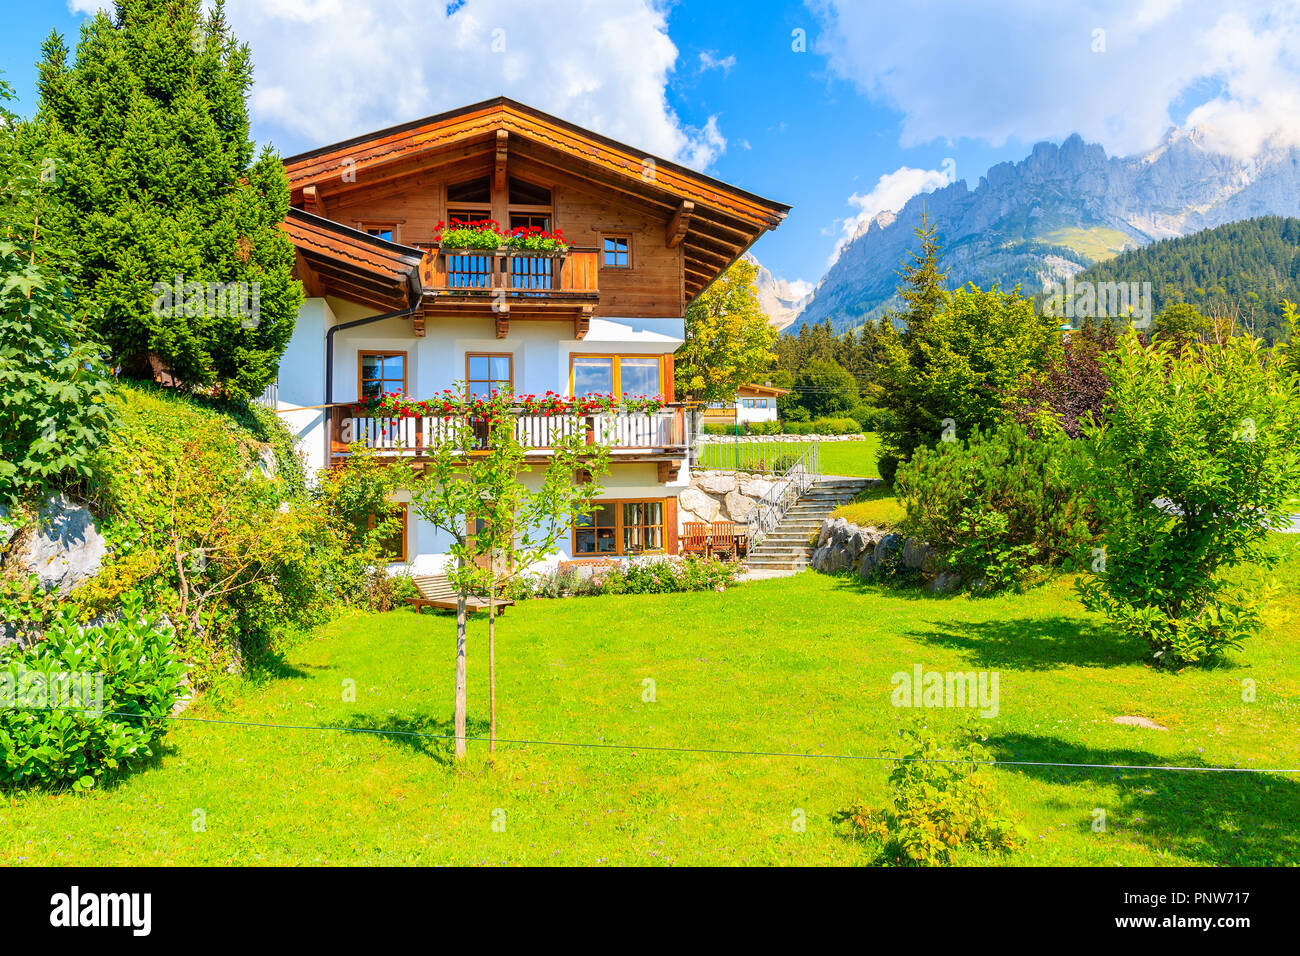 Traditional wooden alpine on green meadow in Going am Wilden Kaiser mountain village on sunny summer day, Tyrol, Austria Stock Photo